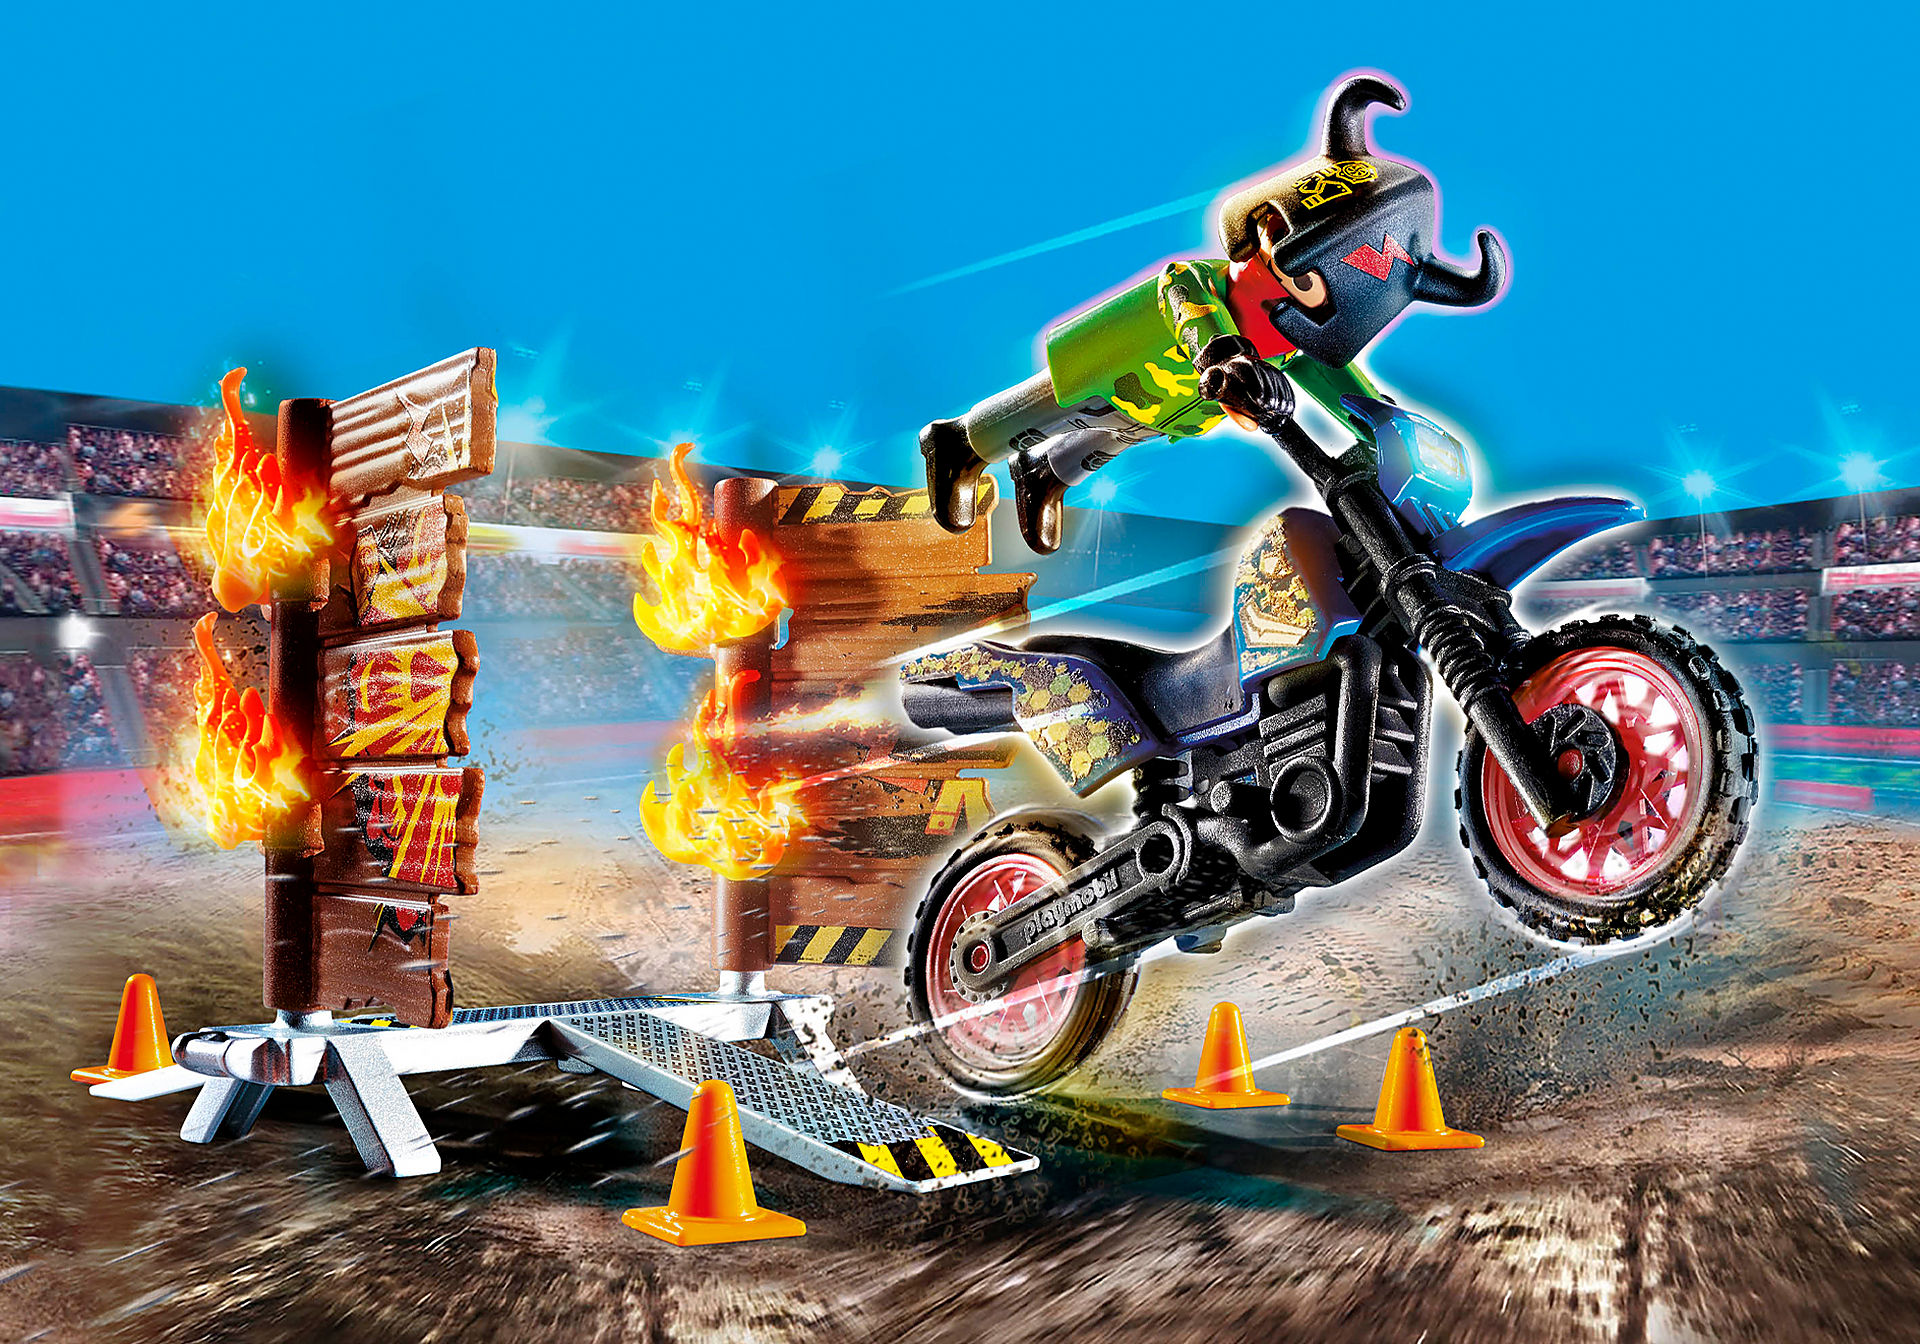 70553 Stunt Show Motocross with Fiery Wall zoom image1